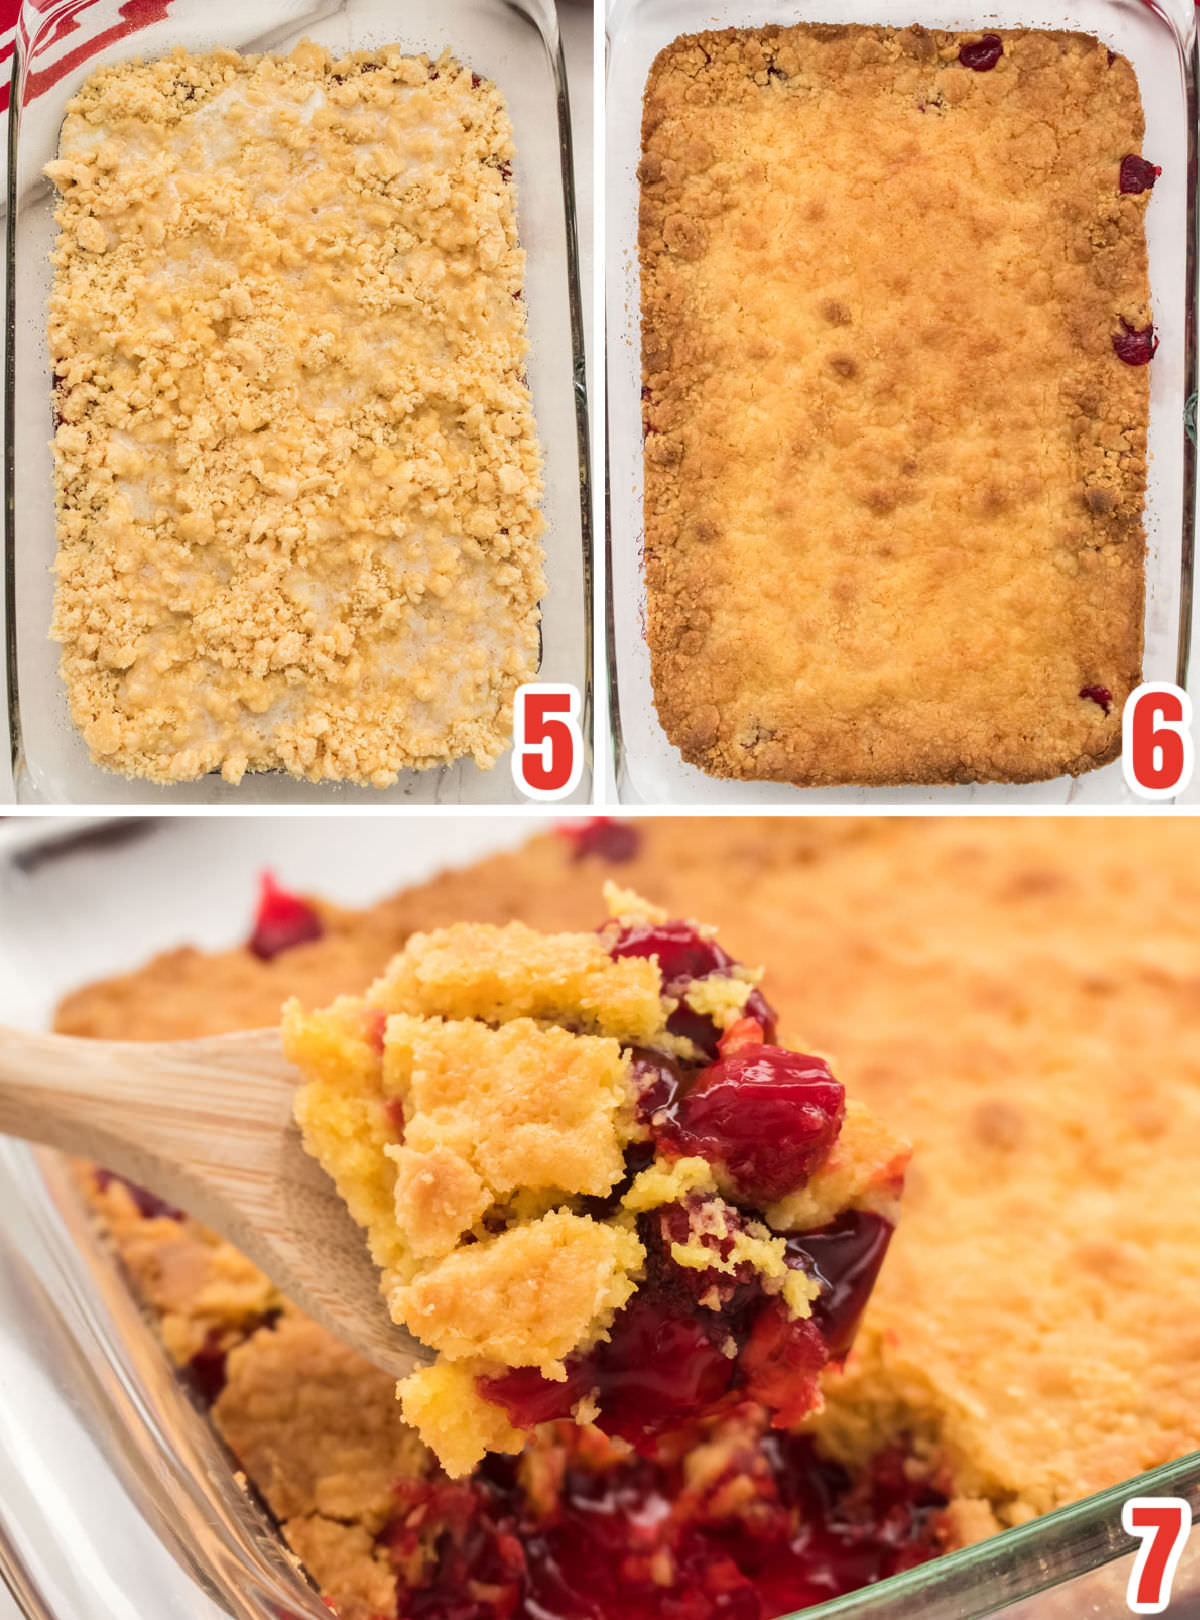 Collage image showing the Cherry Dump Cake before it goes in the oven and after it comes out of the oven.